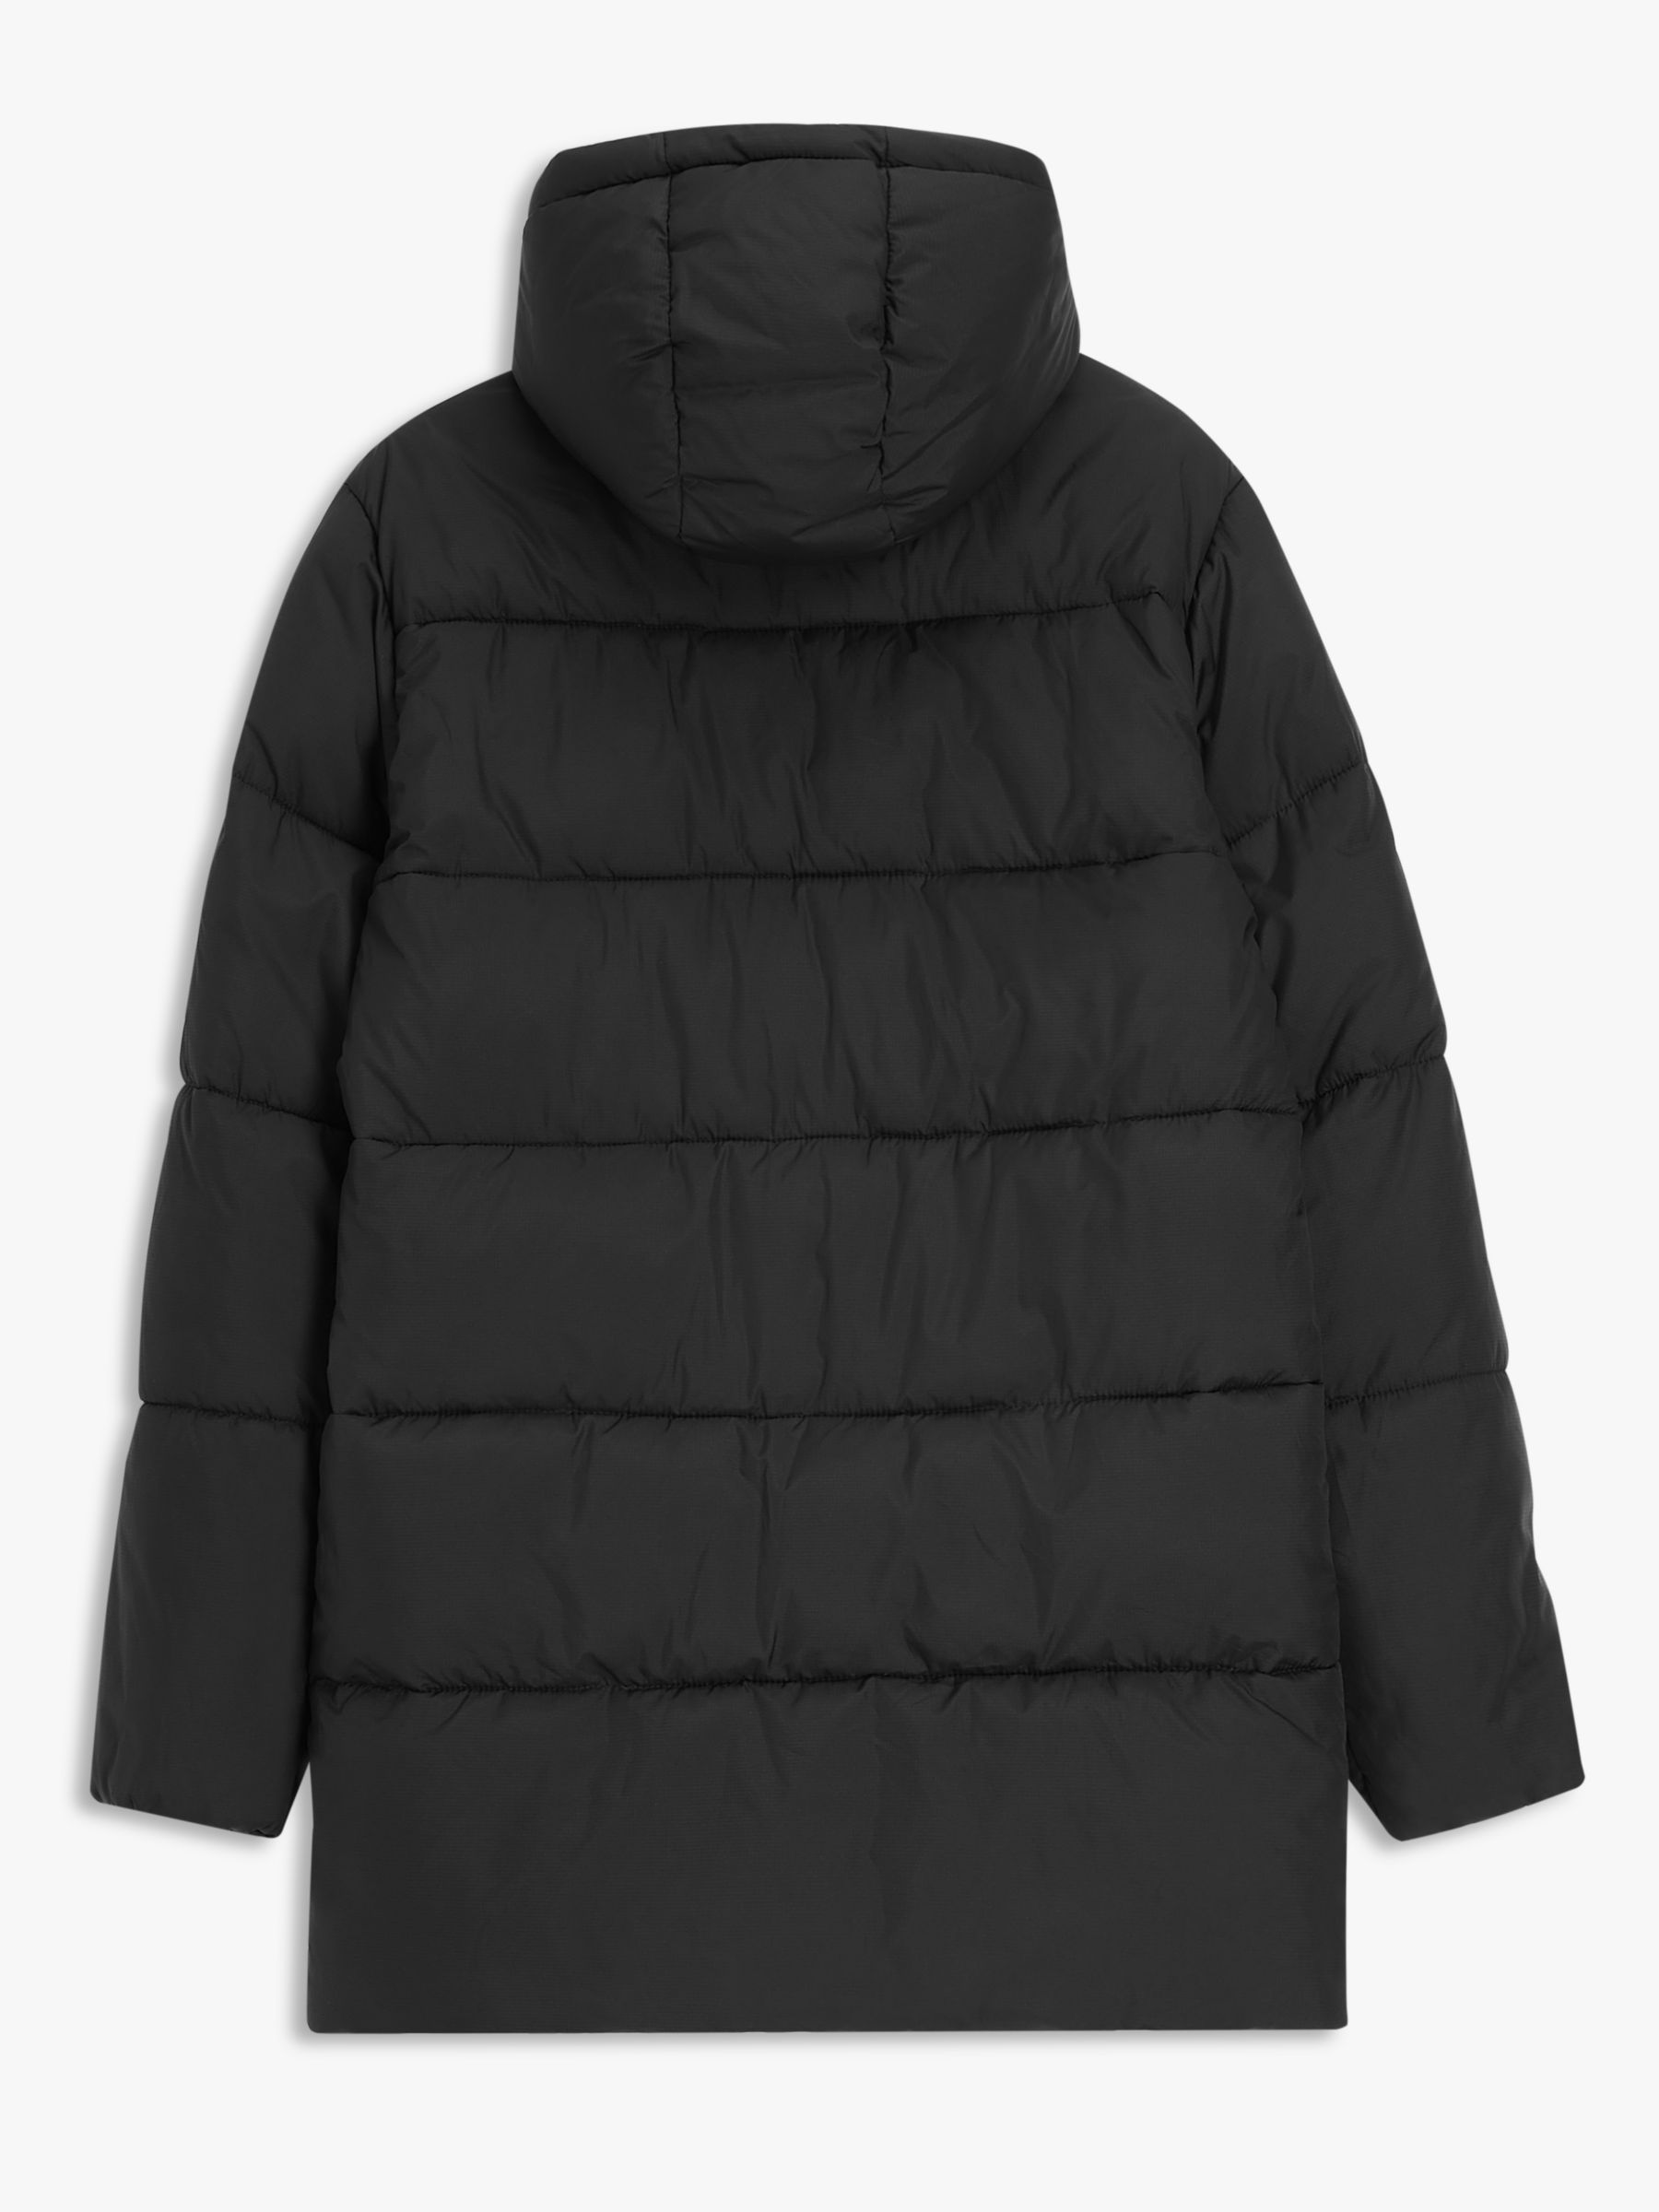 ANYDAY John Lewis & Partners Hooded Long Puffer Jacket